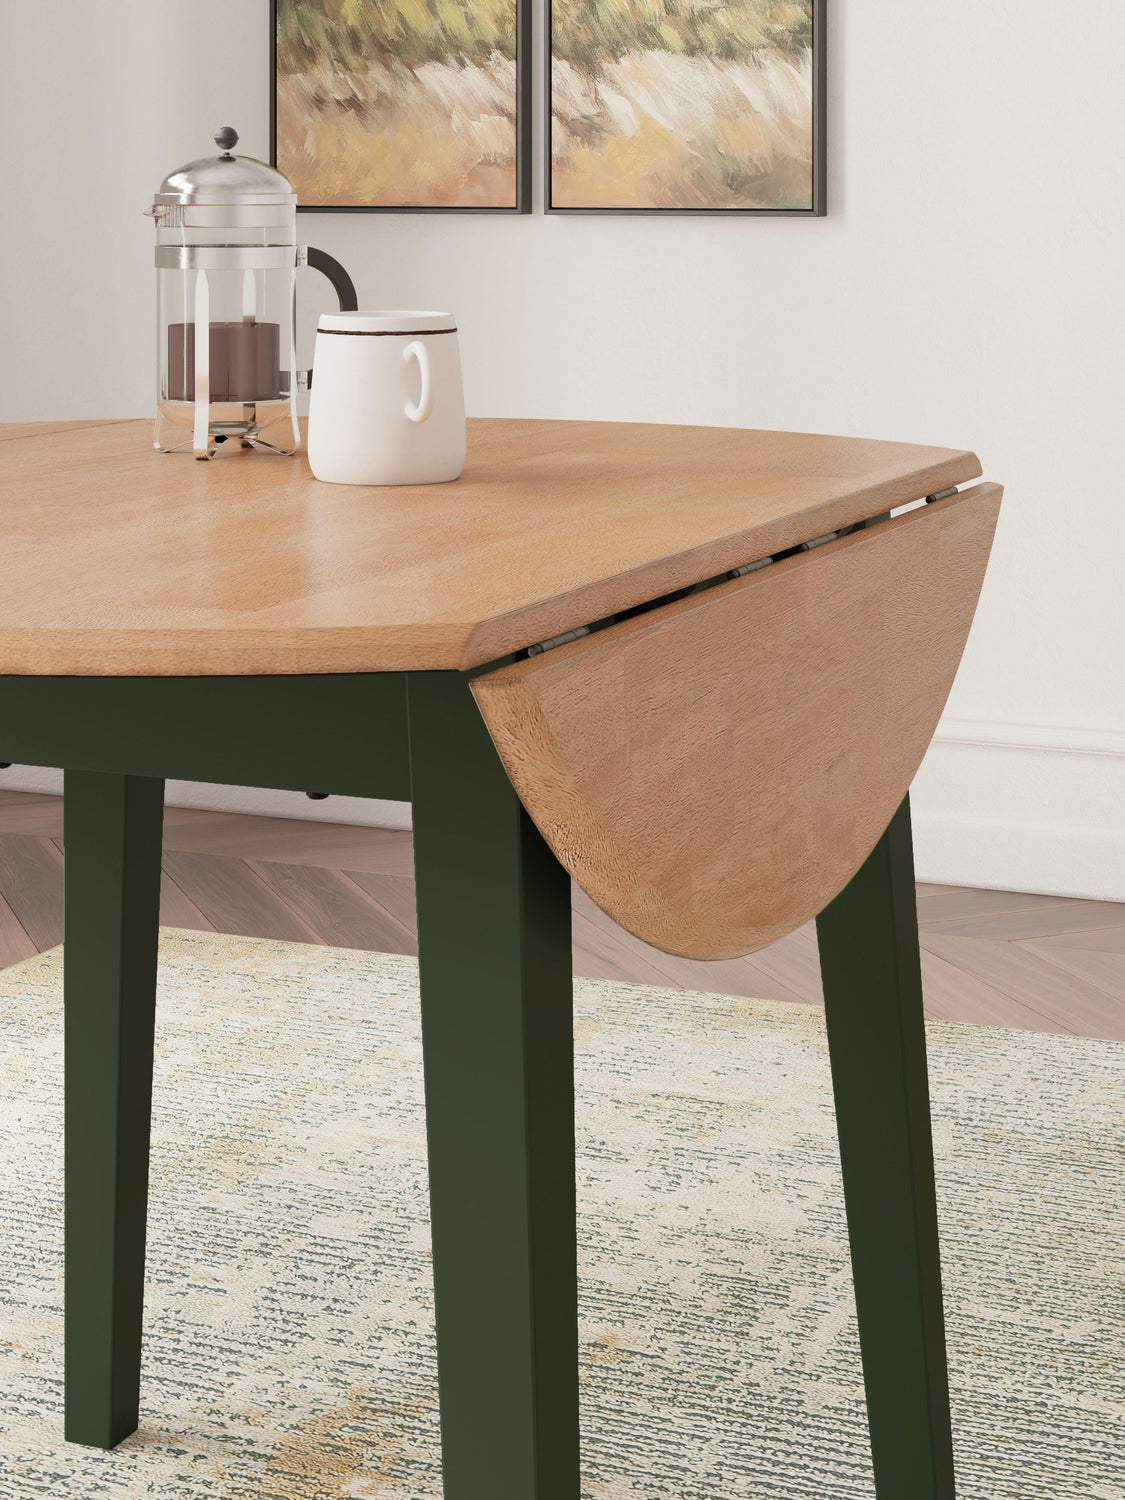 Signature Design by Ashley® - Gesthaven - Round Dining Room Drop Leaf Table - 5th Avenue Furniture